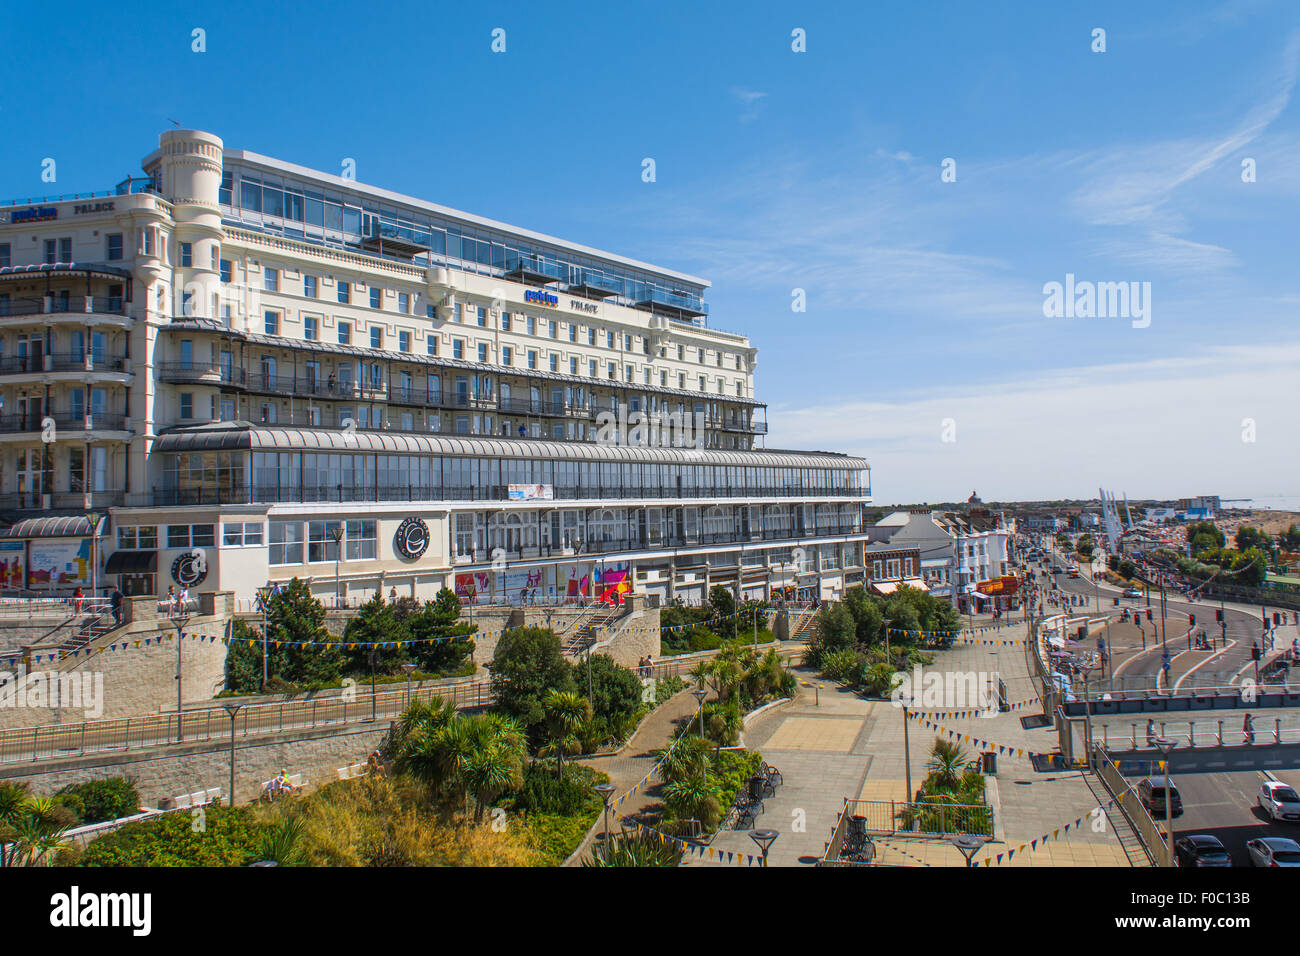 The Park Inn Hotel on the sea front Southend-on-Sea Stock Photo